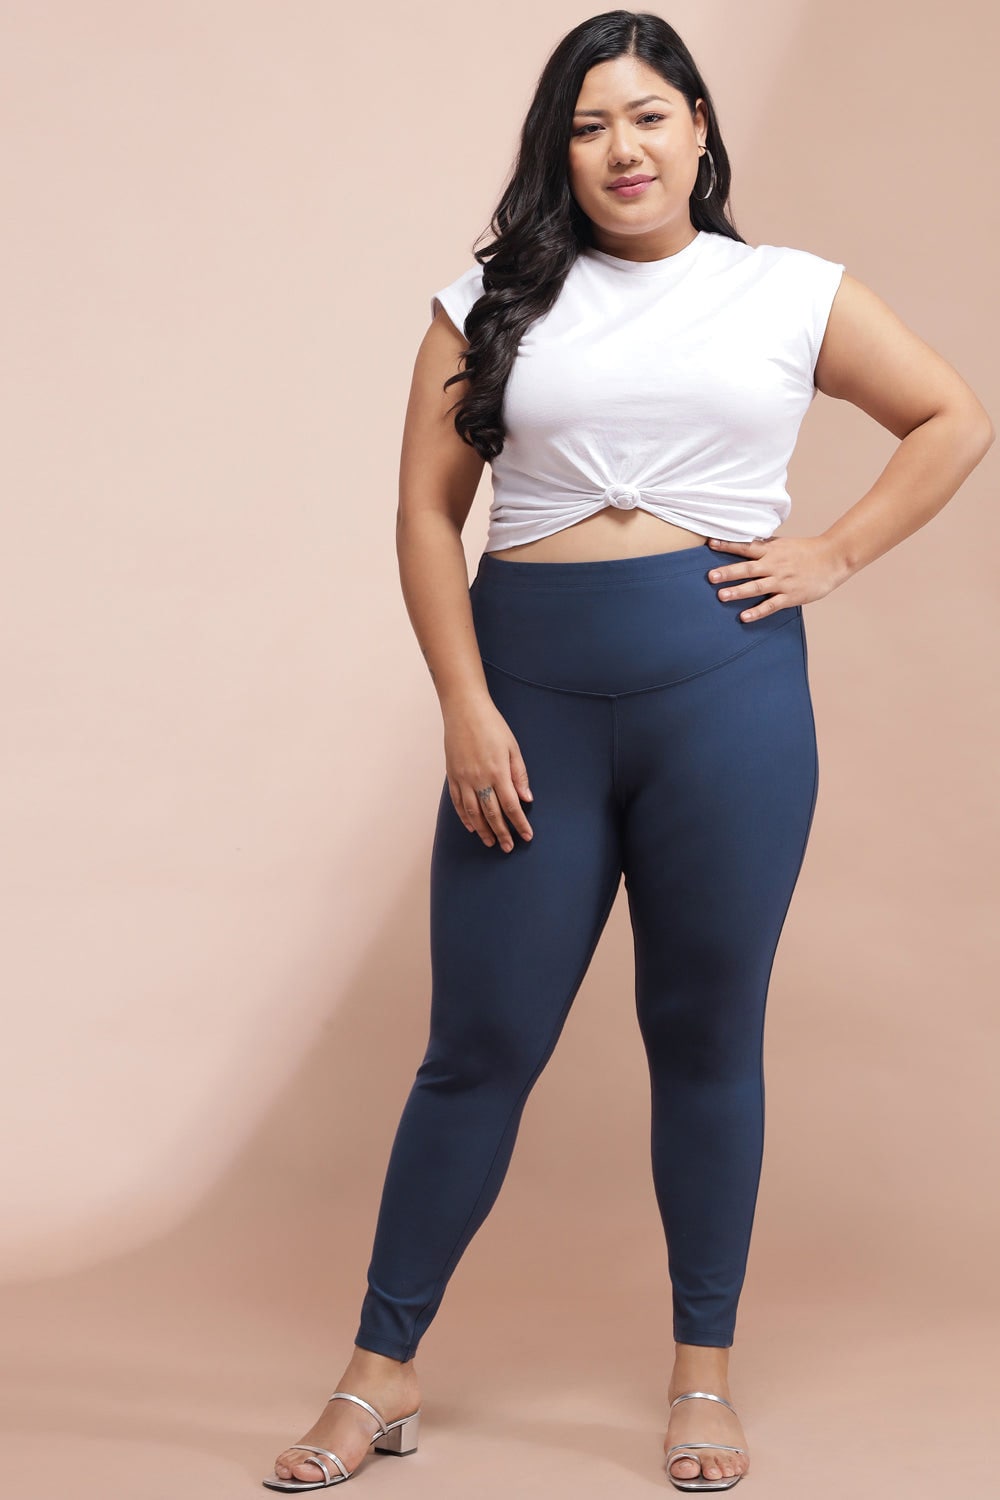 Amydus Plus Size Clothing : Beyond Measure The Story 